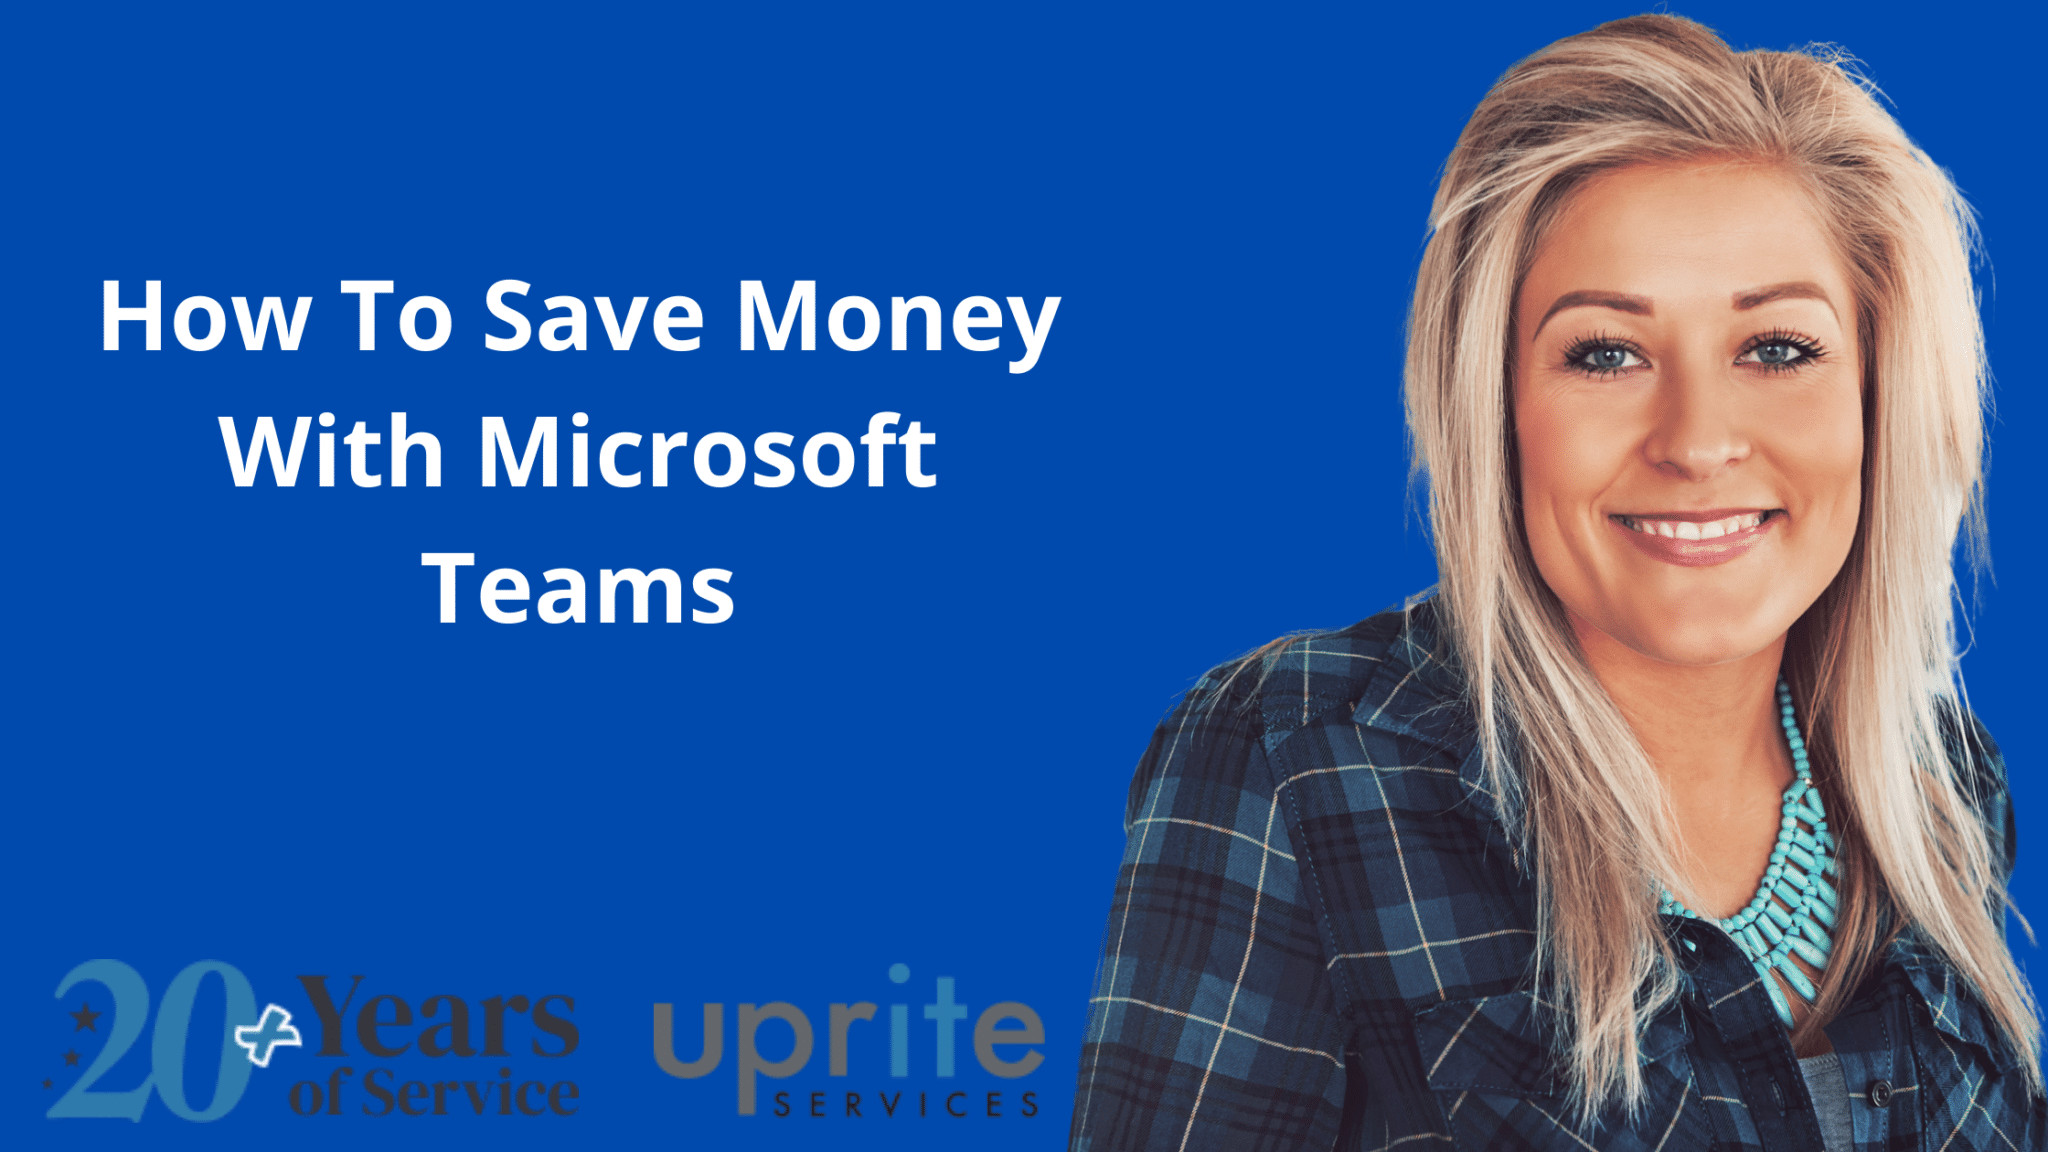 How To Save Money With Microsoft Teams